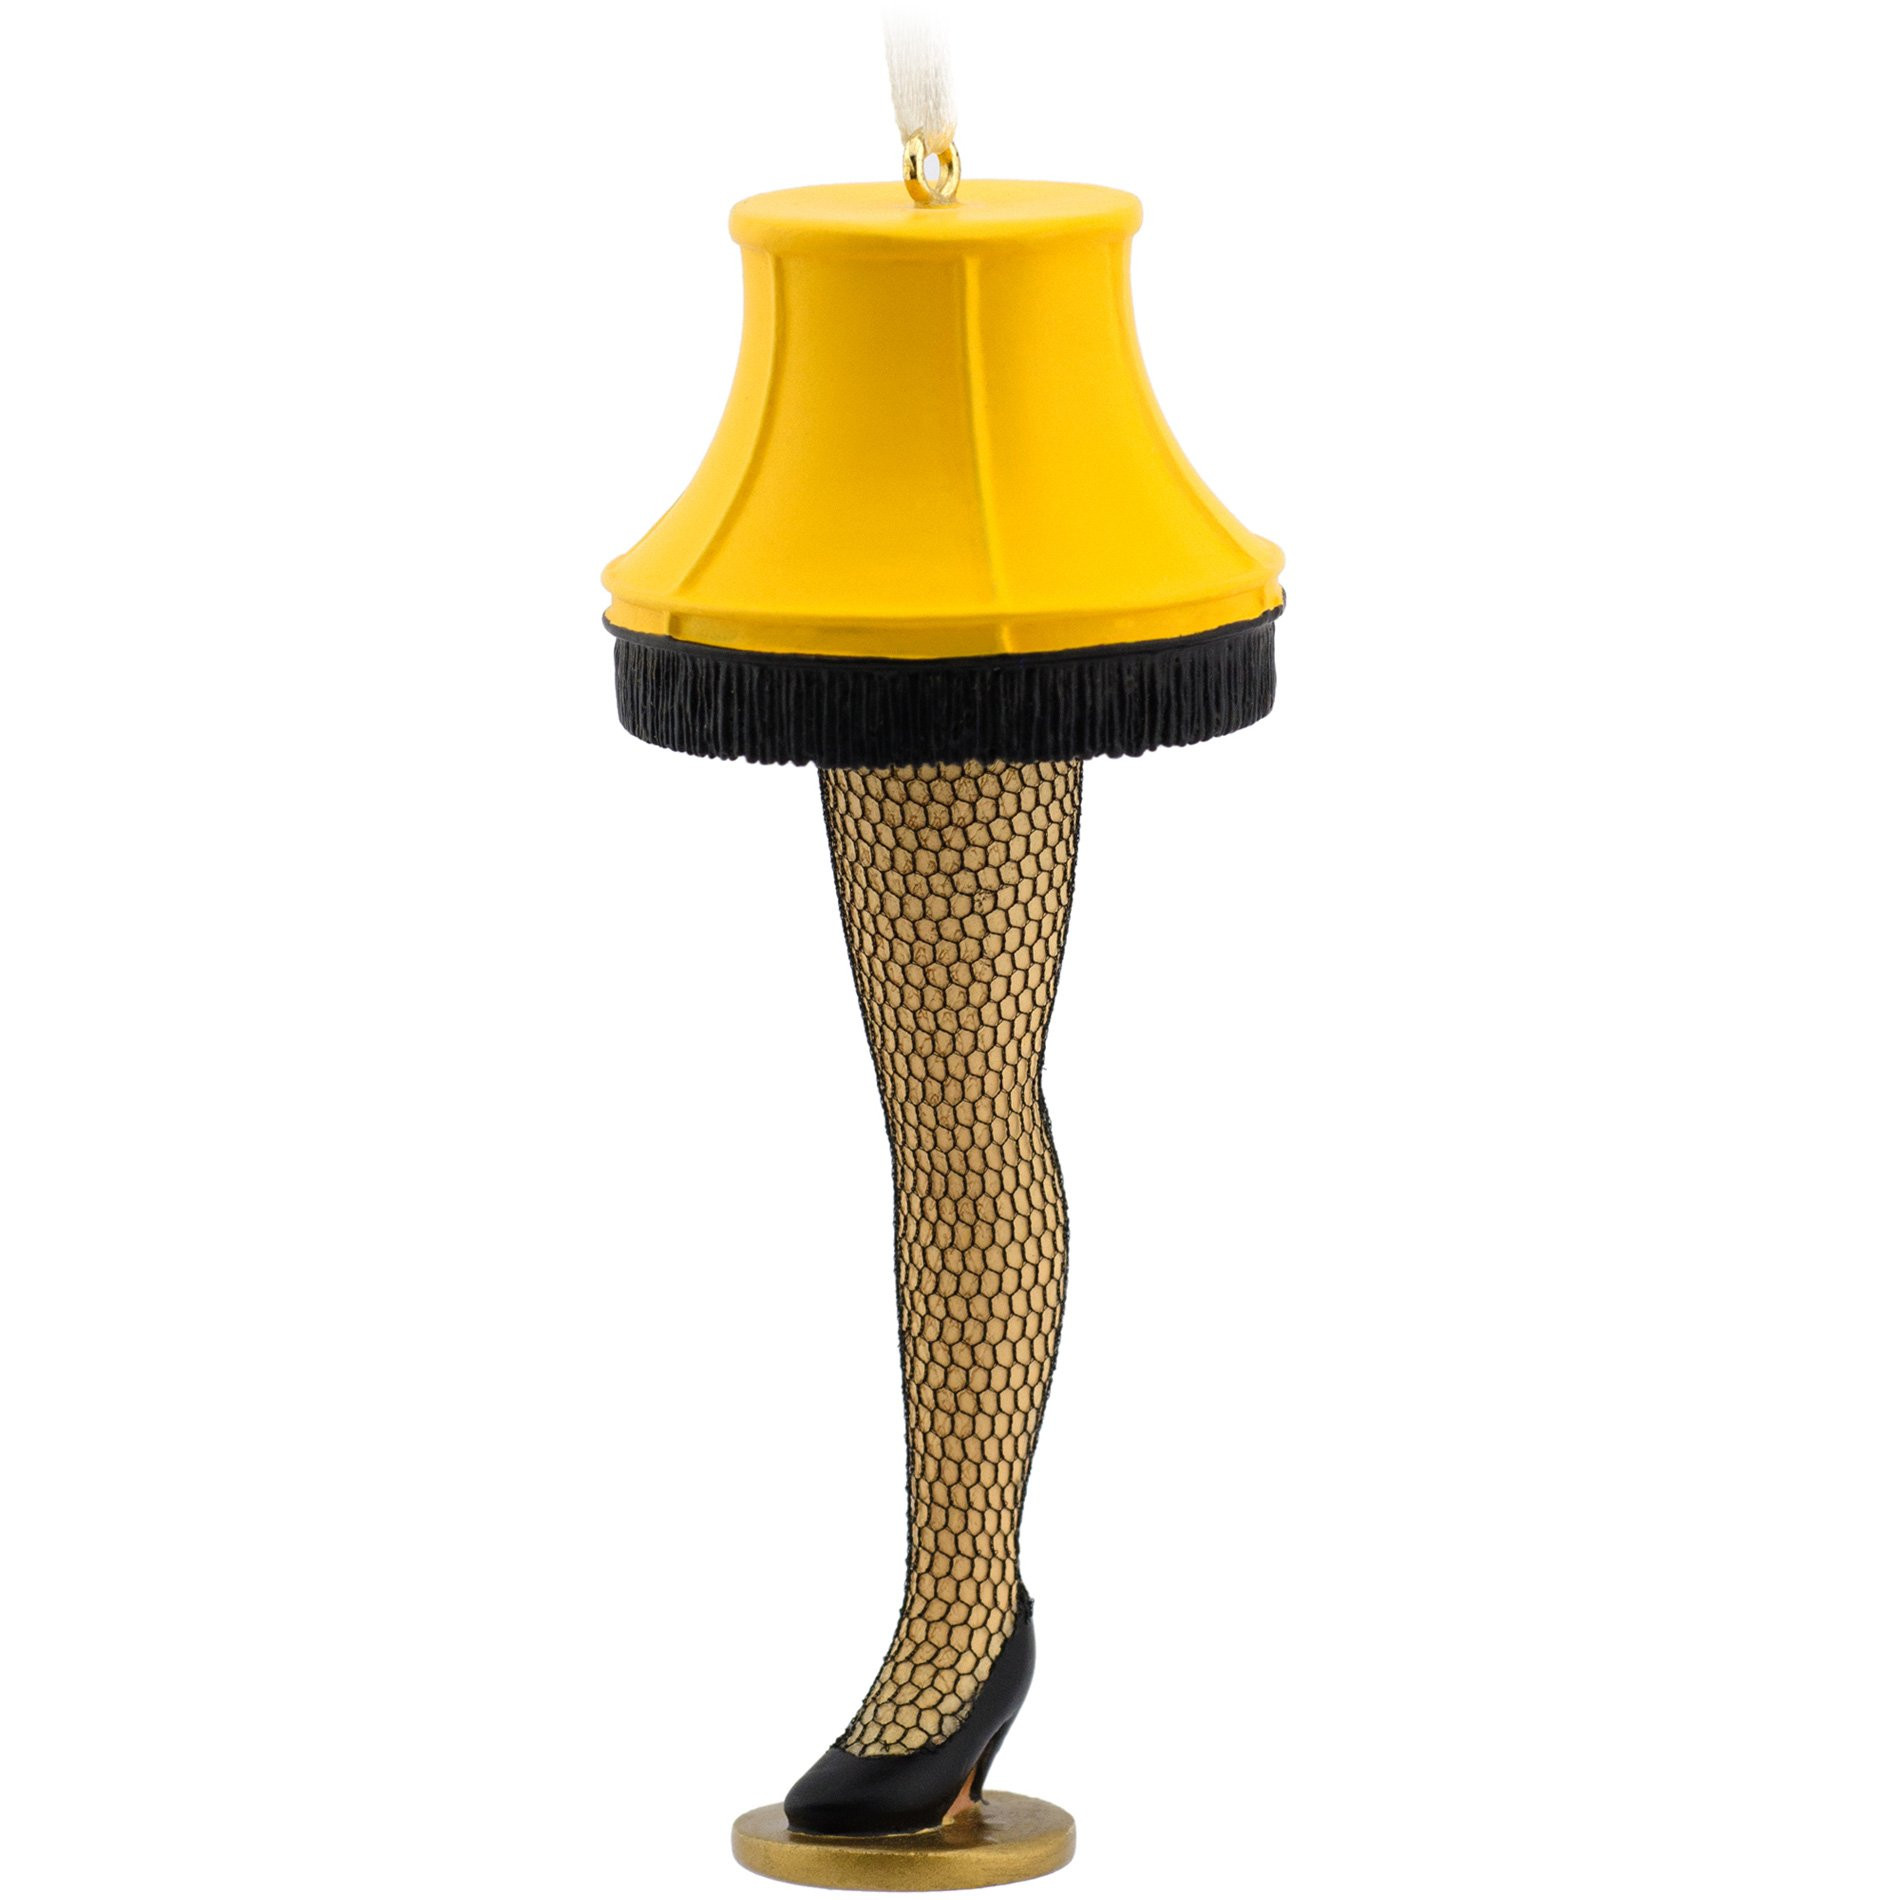 Christmas Story Leg Lamp Amazon
 Channel a hilarious moment from your favorite holiday